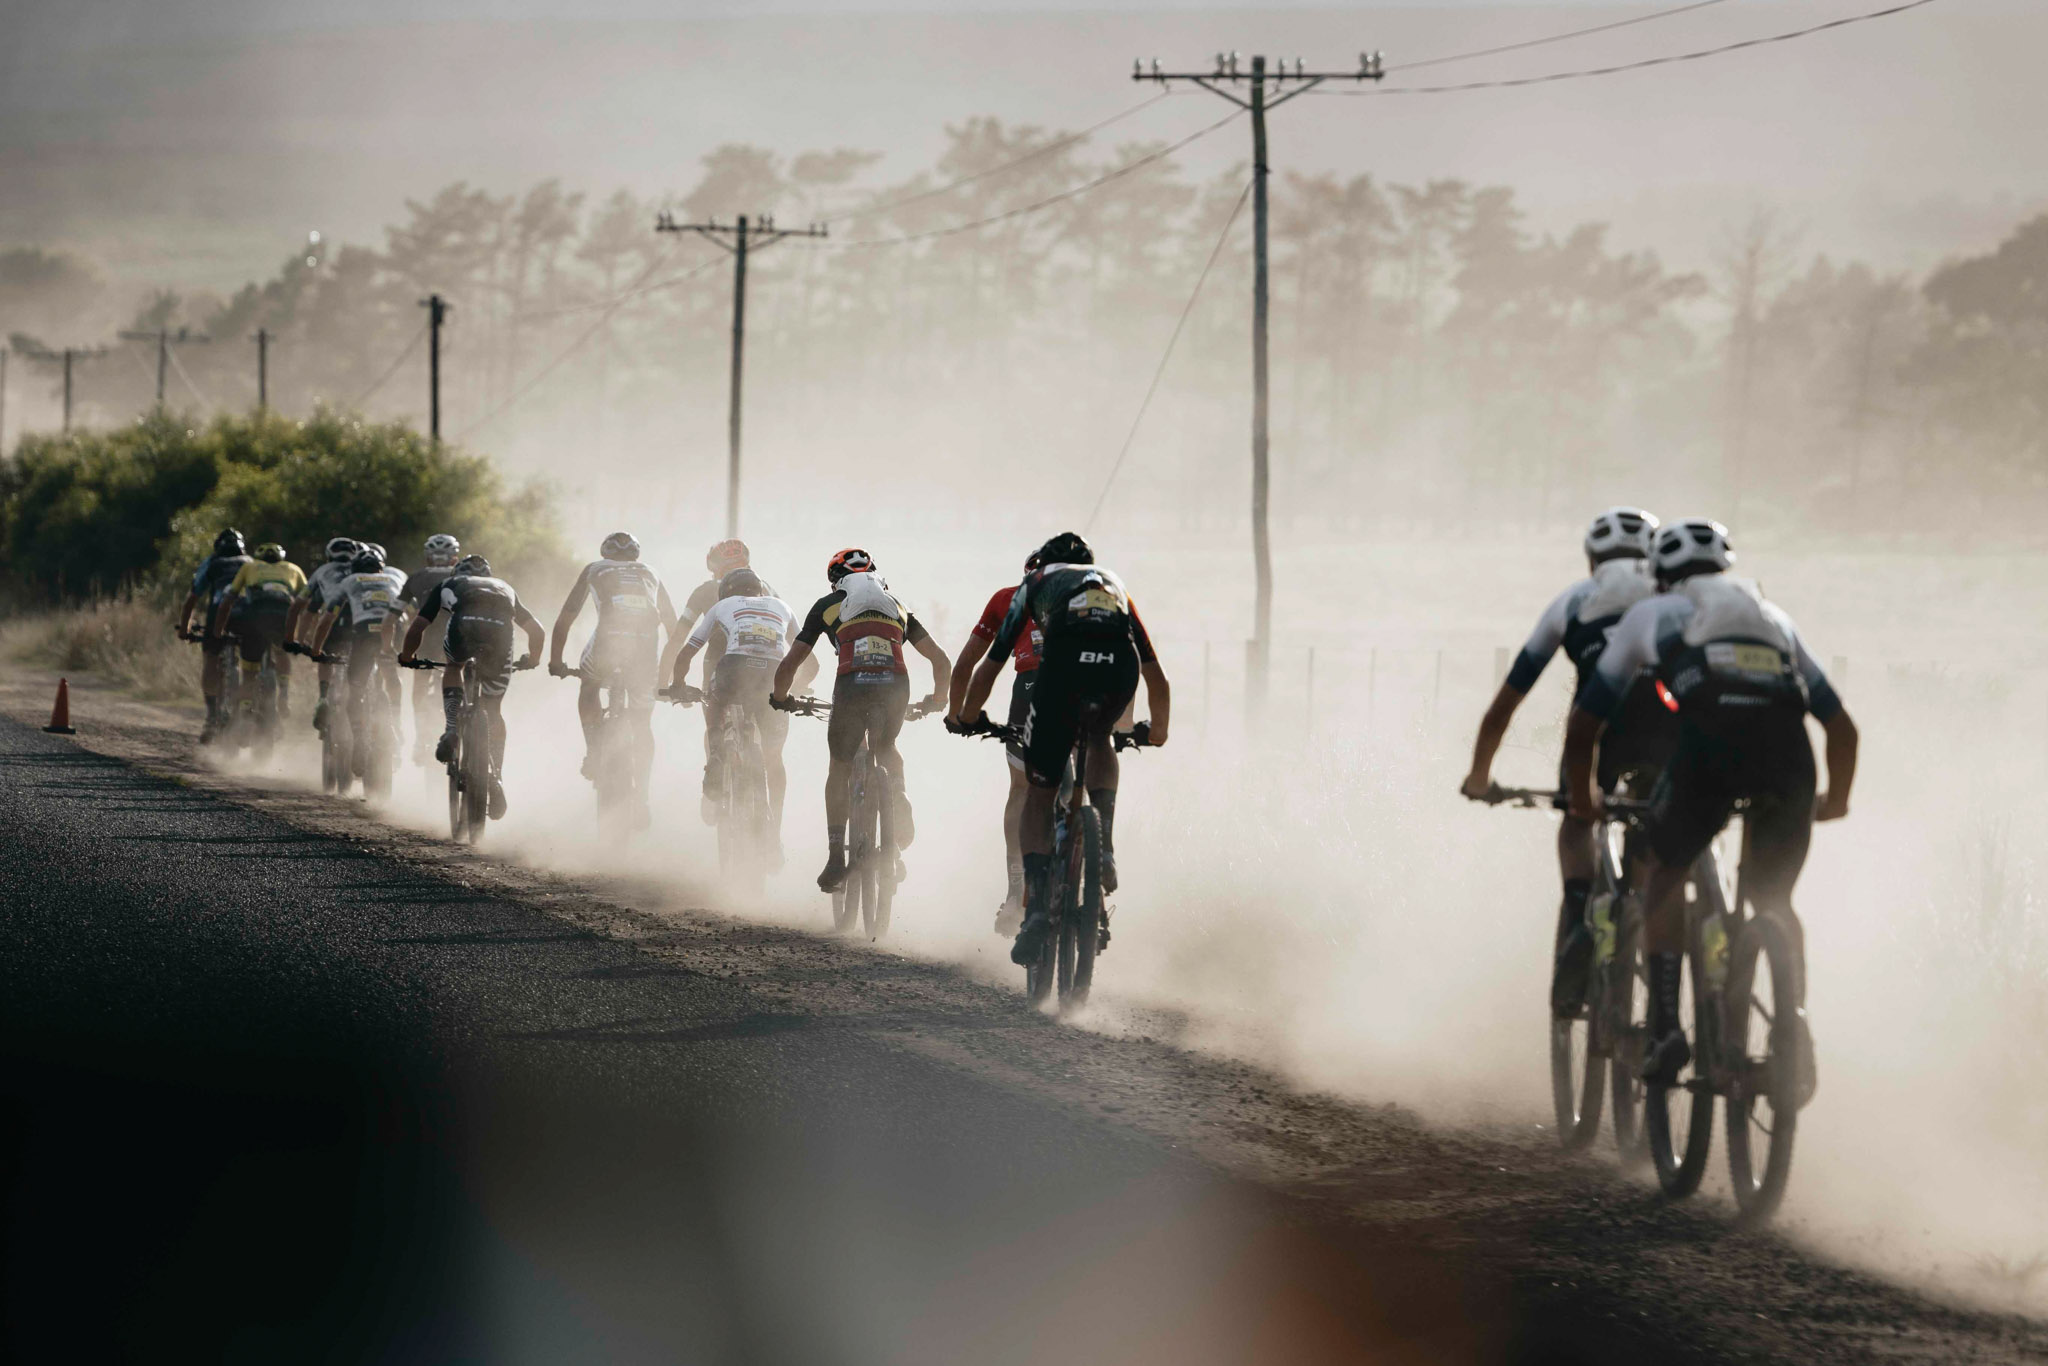 A single file of cyclists ride along a dusty road